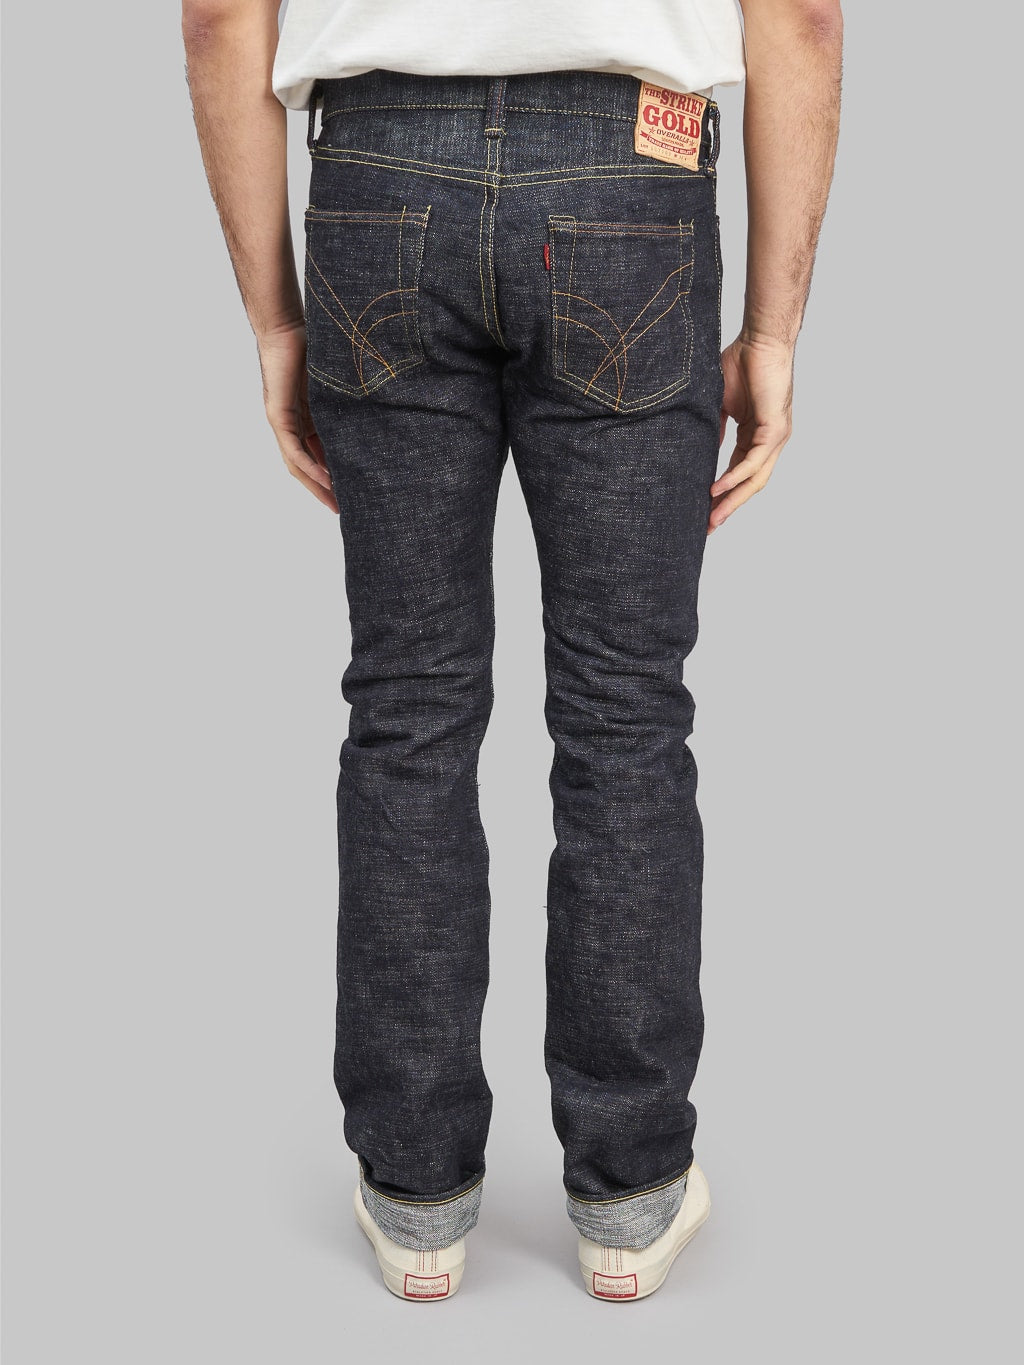 The Strike Gold 7109 Ultra Slubby Slim Tapered Jeans back fit